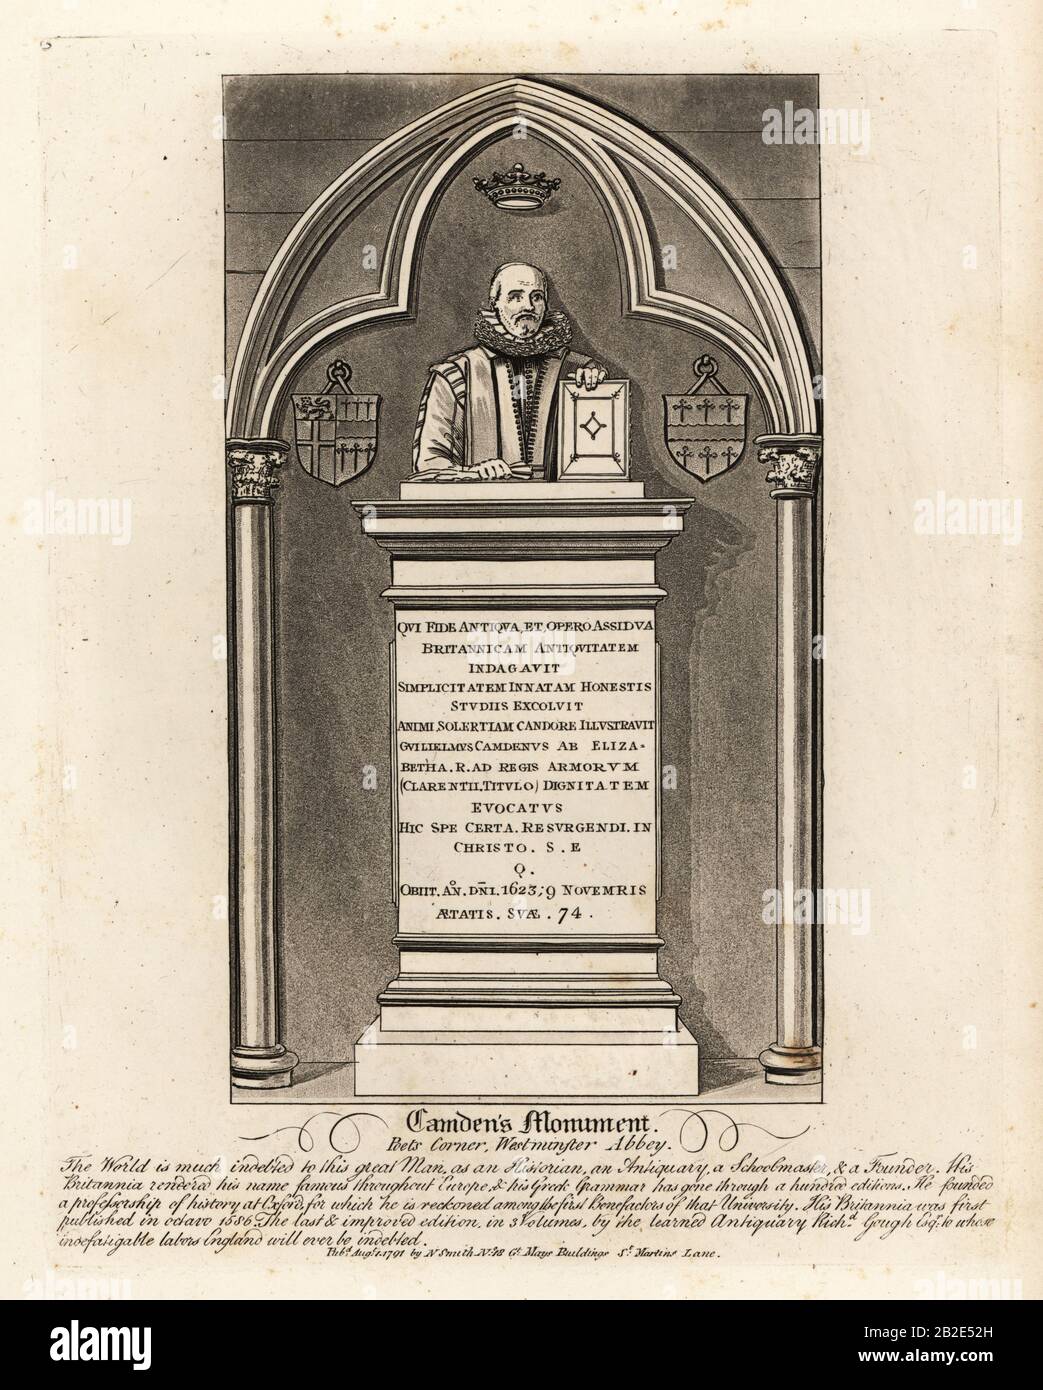 Grave monument to the Elizabethan antiquarian and herald William Camdem, died 1623, in Poets Corner, Westminster Abbey. Copperplate engraving by John Thomas Smith after original drawings by members of the Society of Antiquaries from his J.T. Smith’s Antiquities of London and its Environs, J. Sewell, R. Folder, J. Simco, London, 1791. Stock Photo